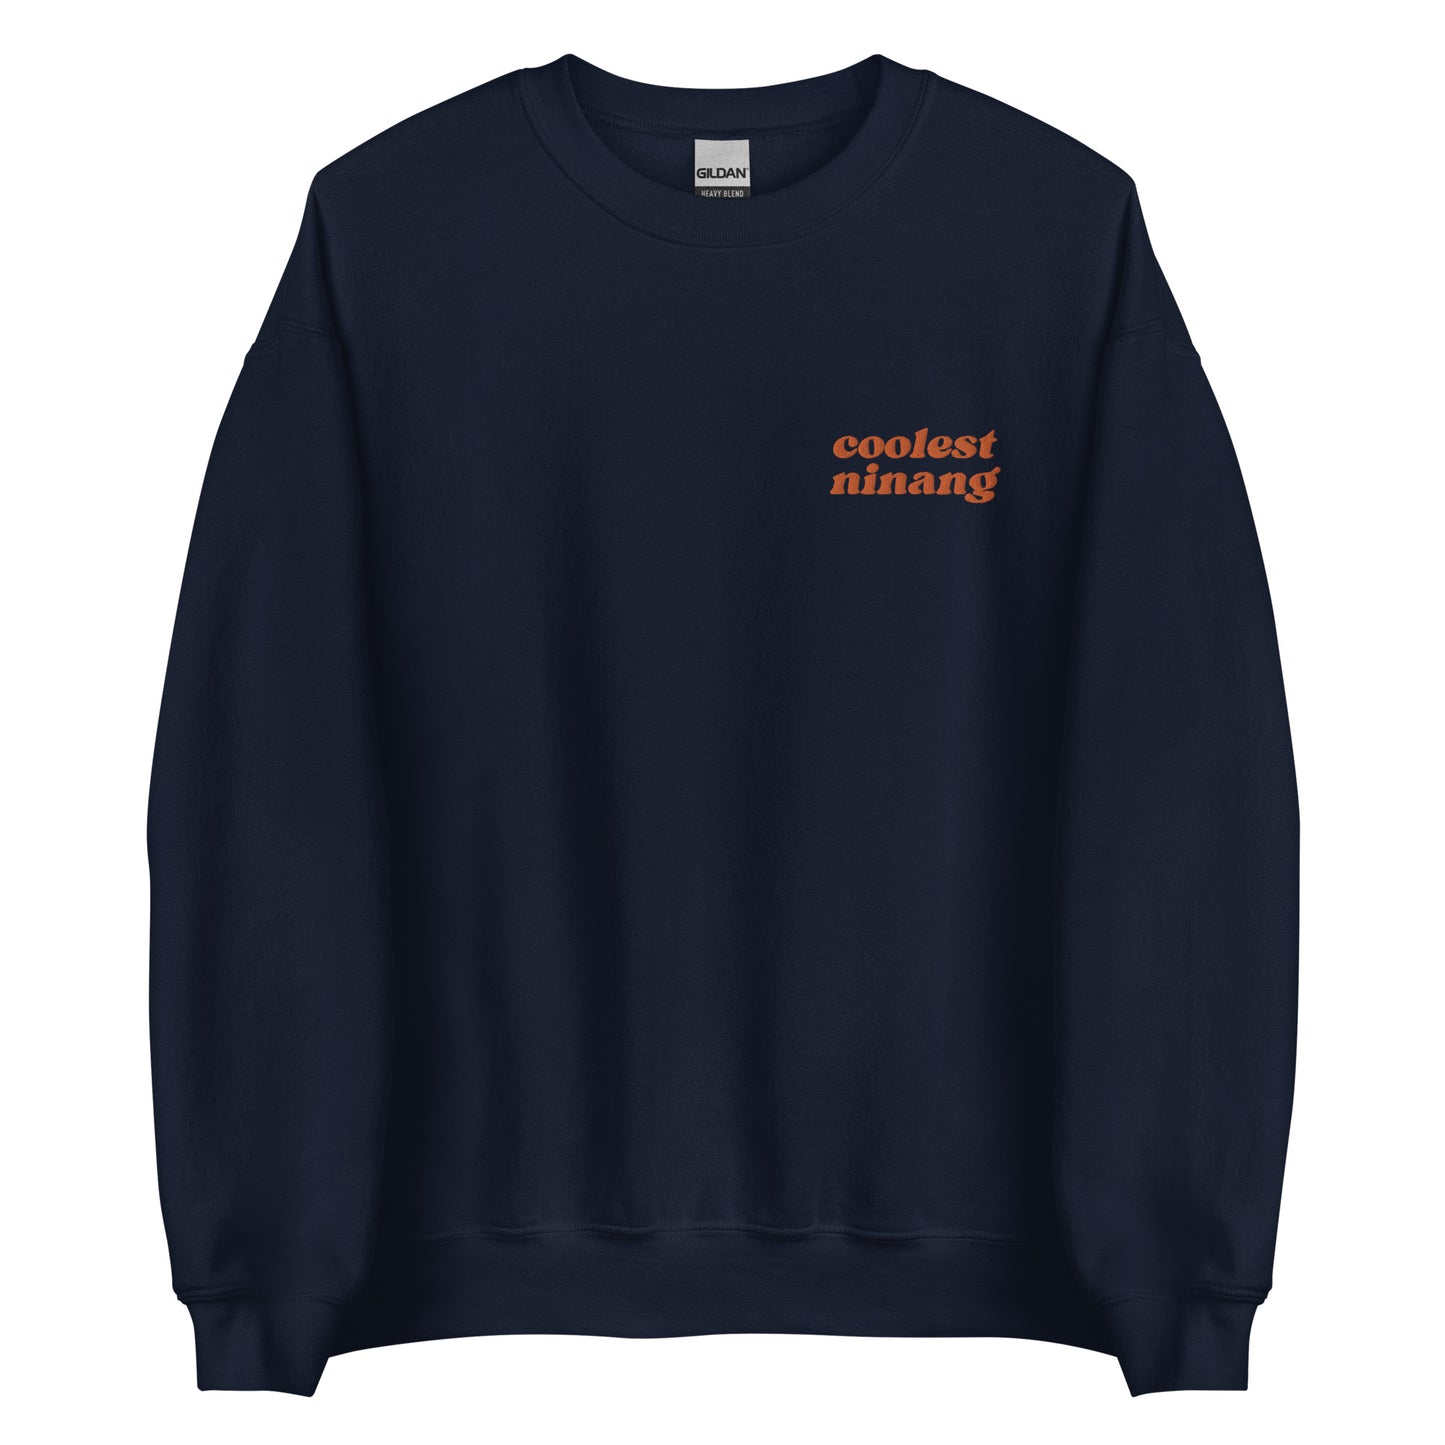 Custom Order: Coolest Ninang Embroidered Sweatshirt - Text Only